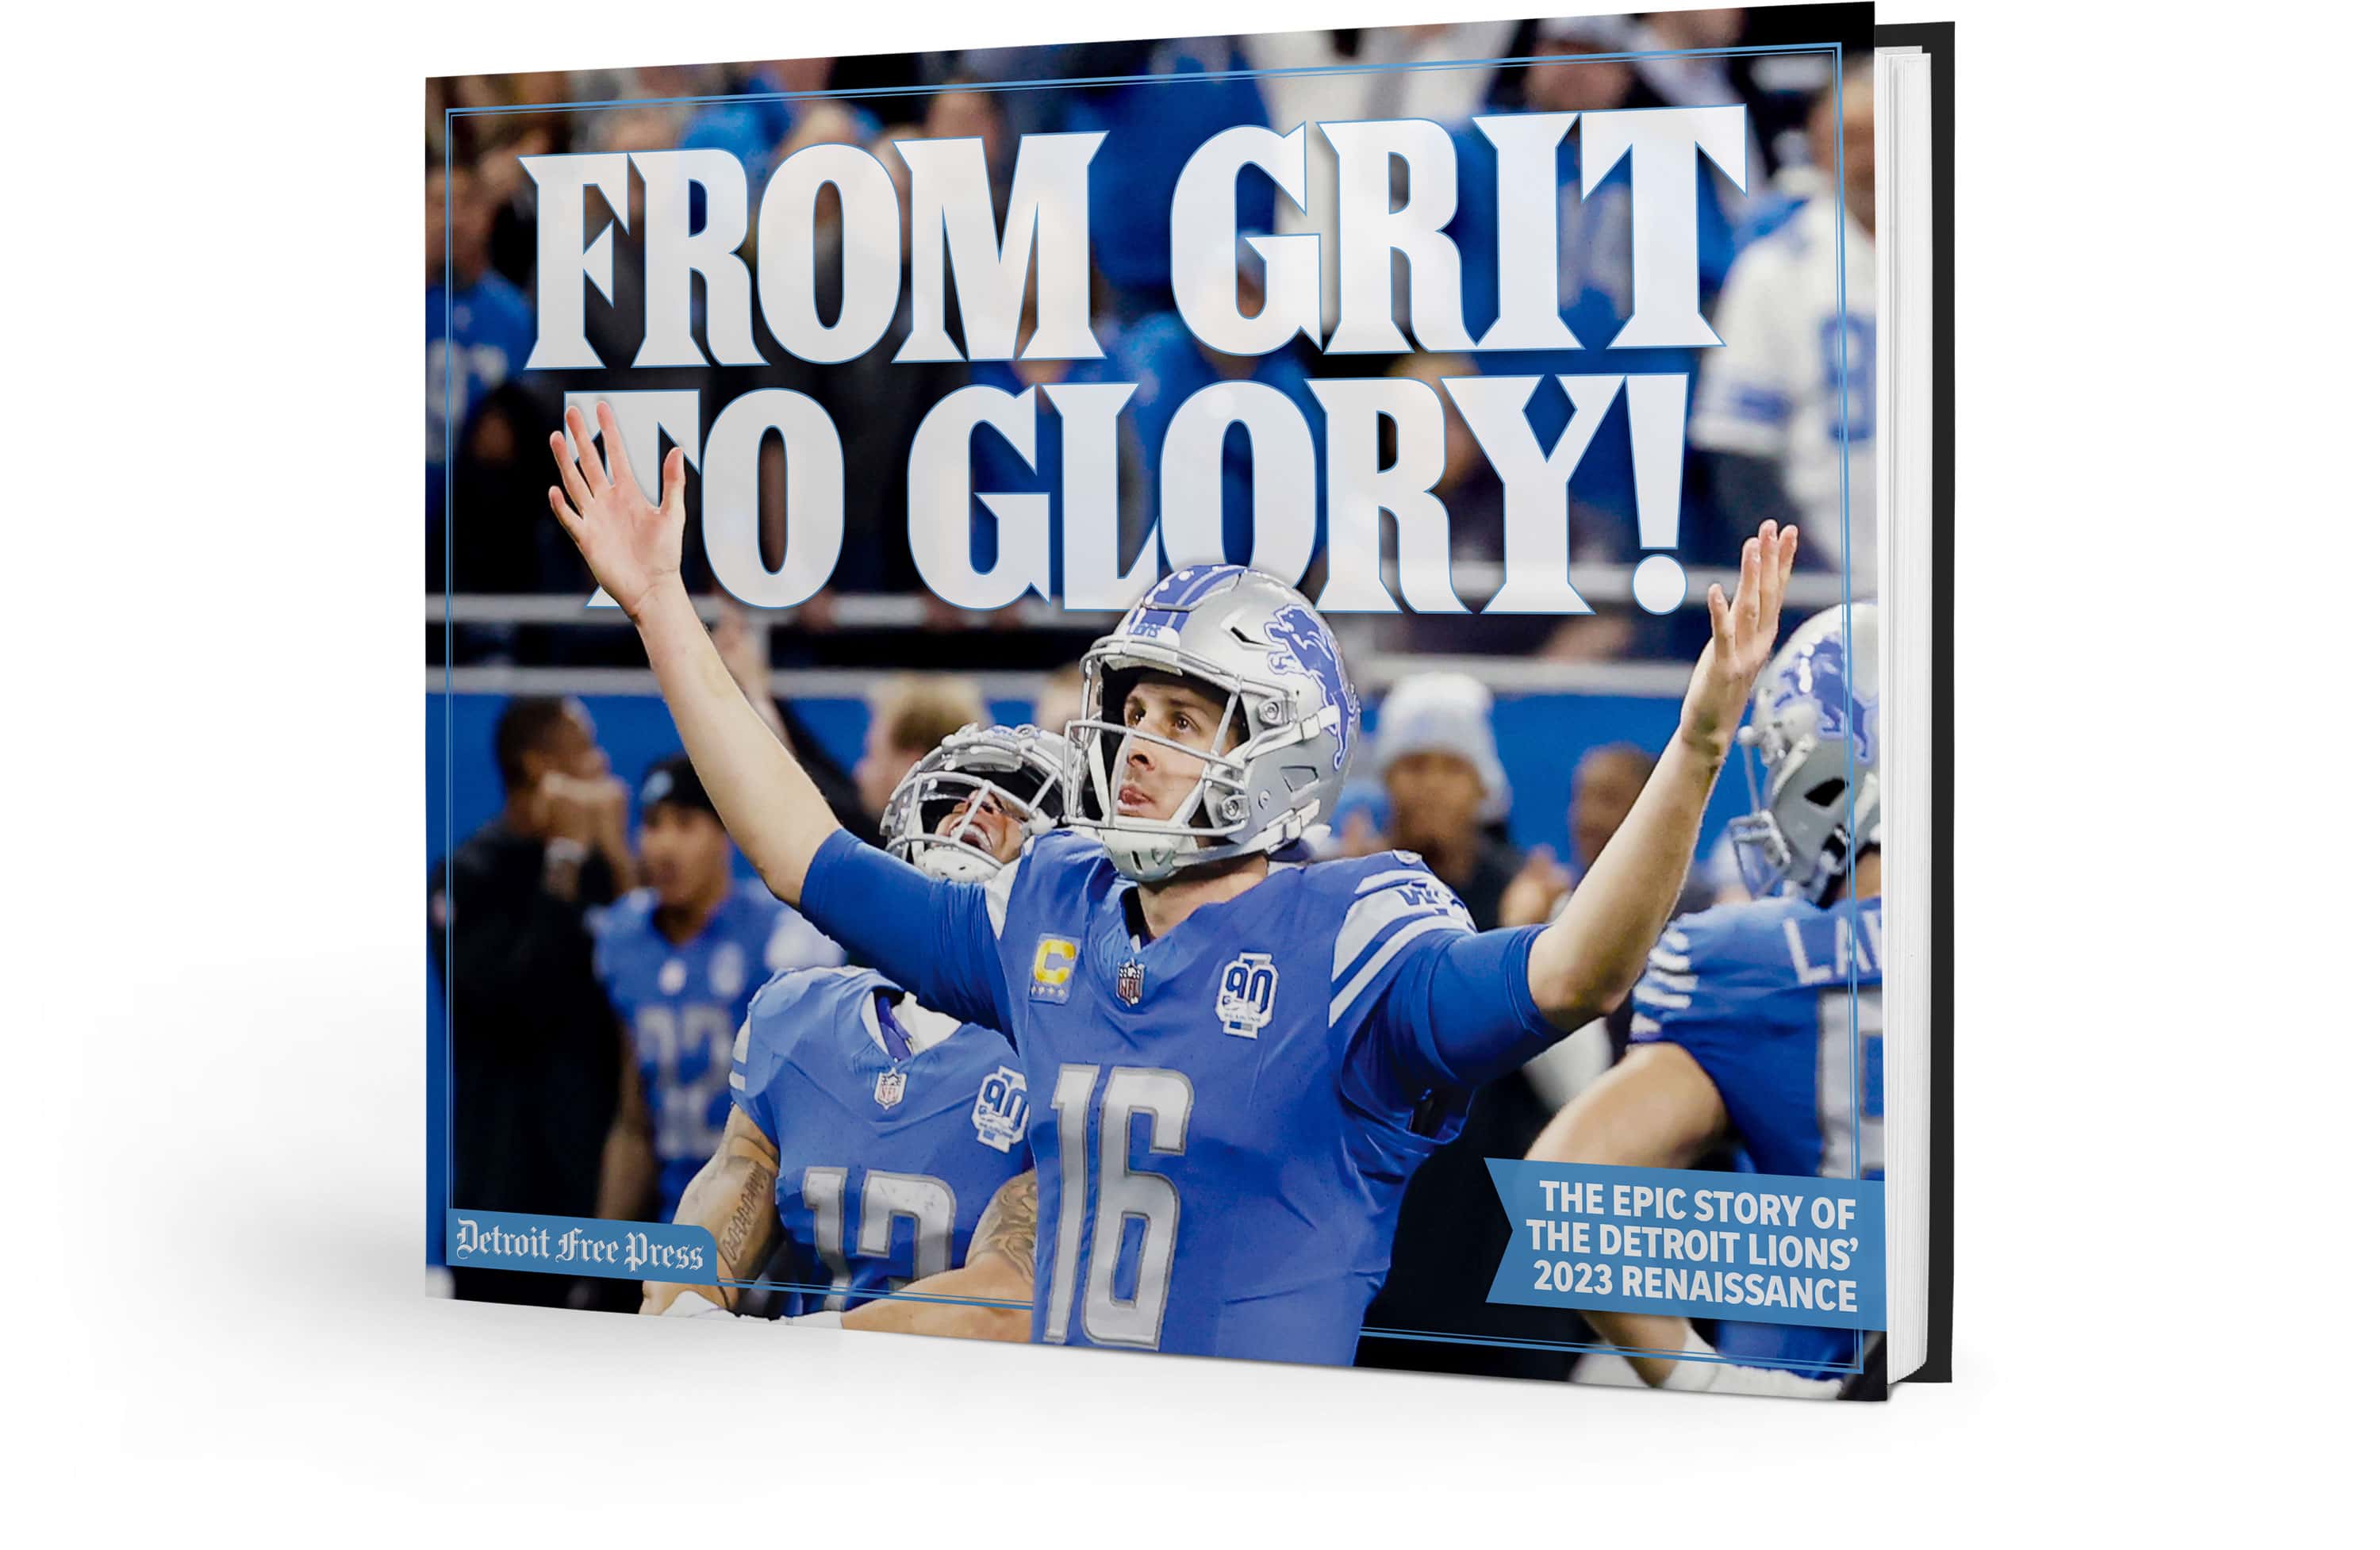 Father's Day gift ideas: Buy your favorite sports fan a Free Press book and wall art